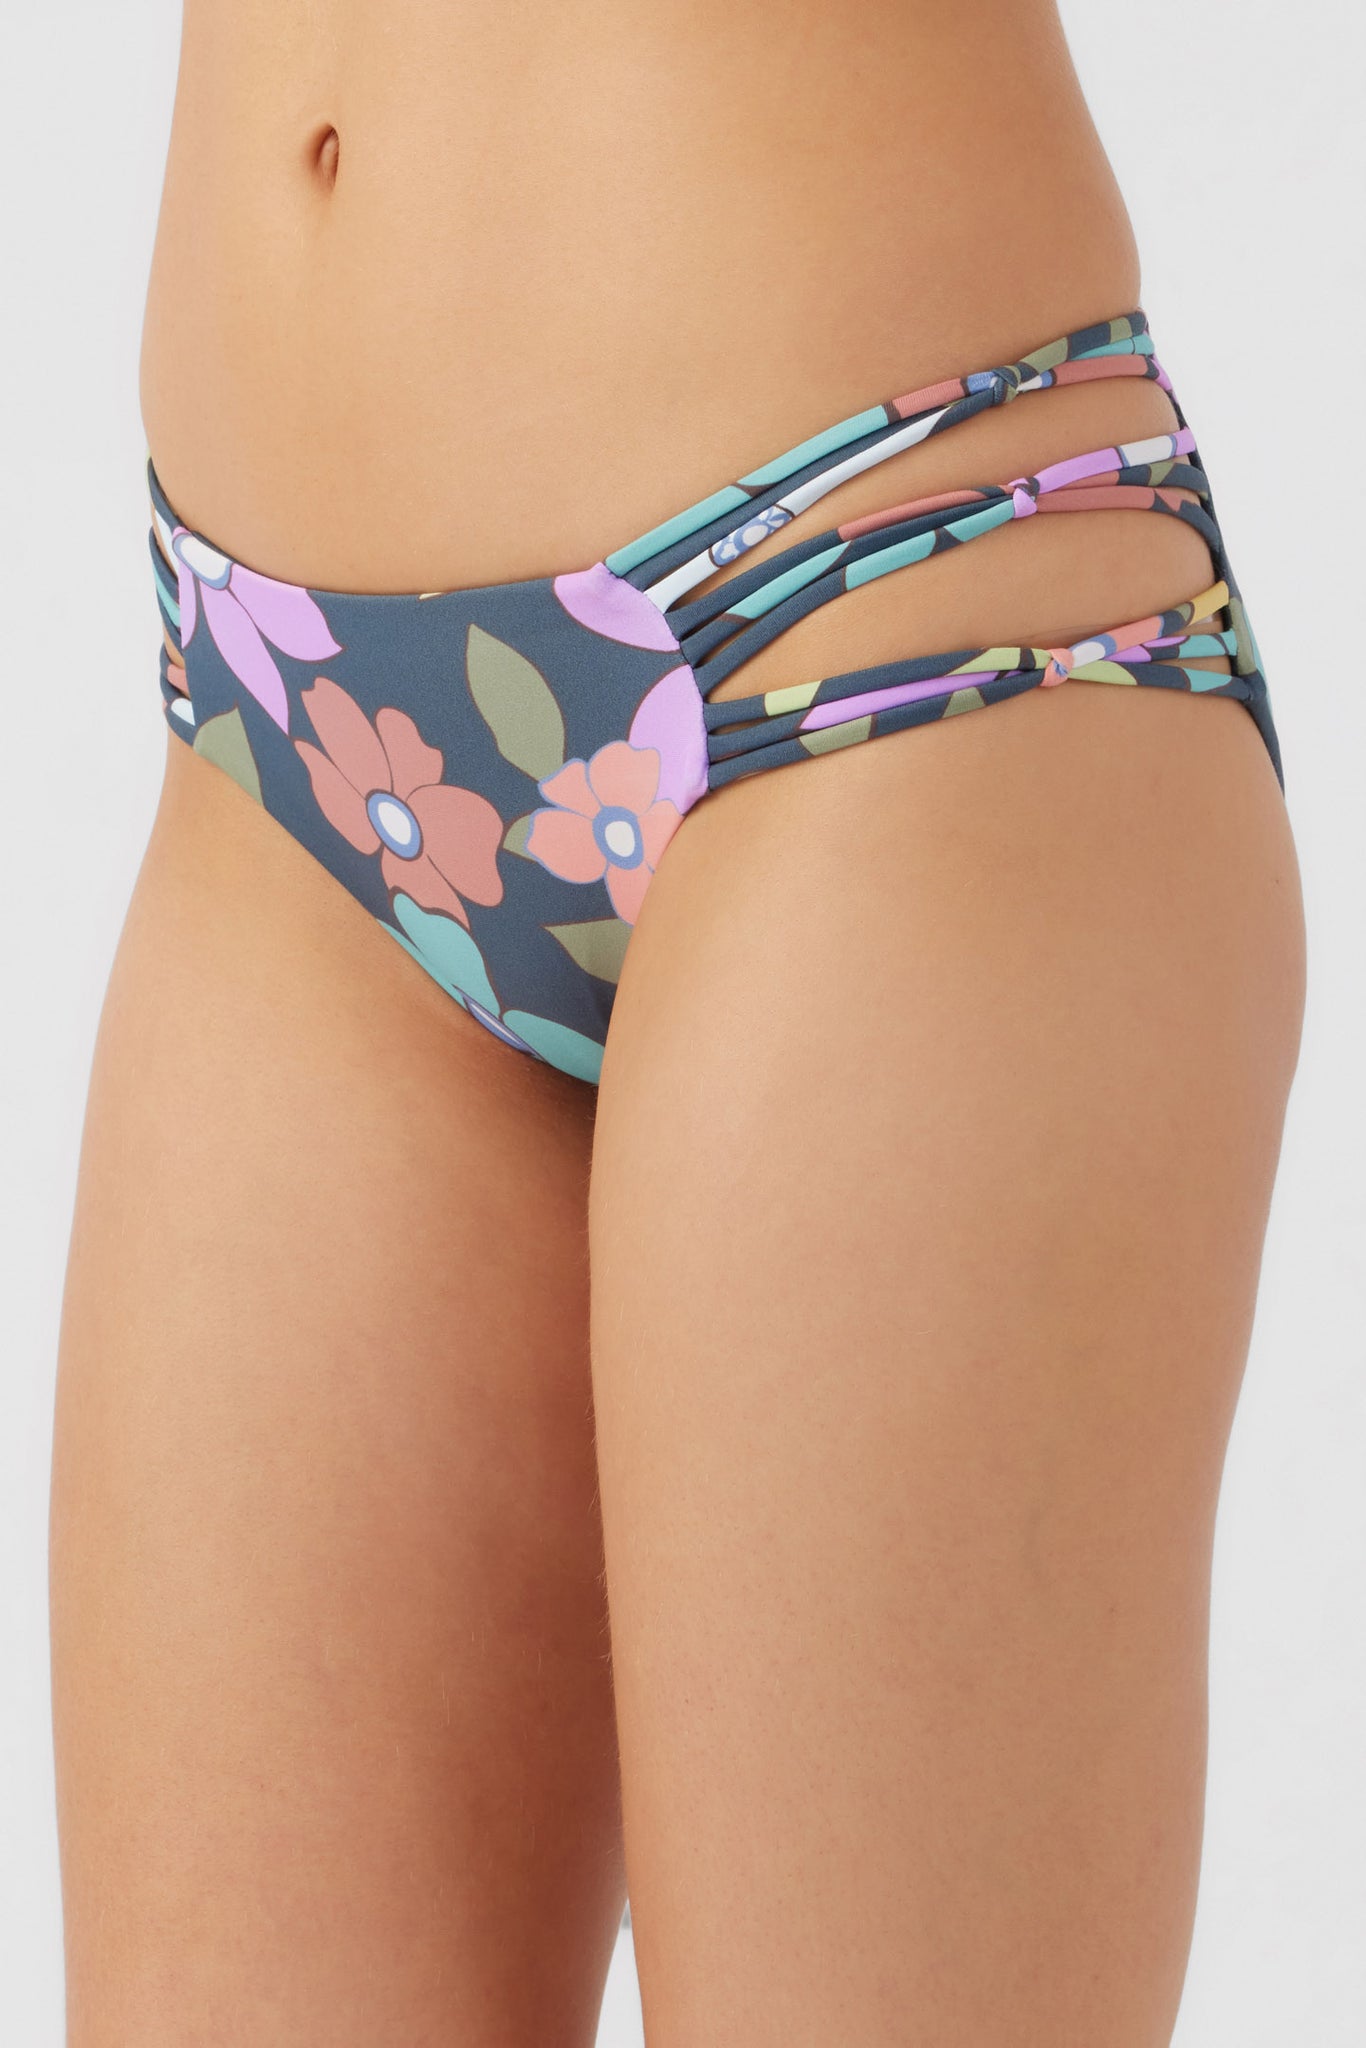 LAYLA FLORAL BOULDERS MID-RISE FULL BOTTOMS